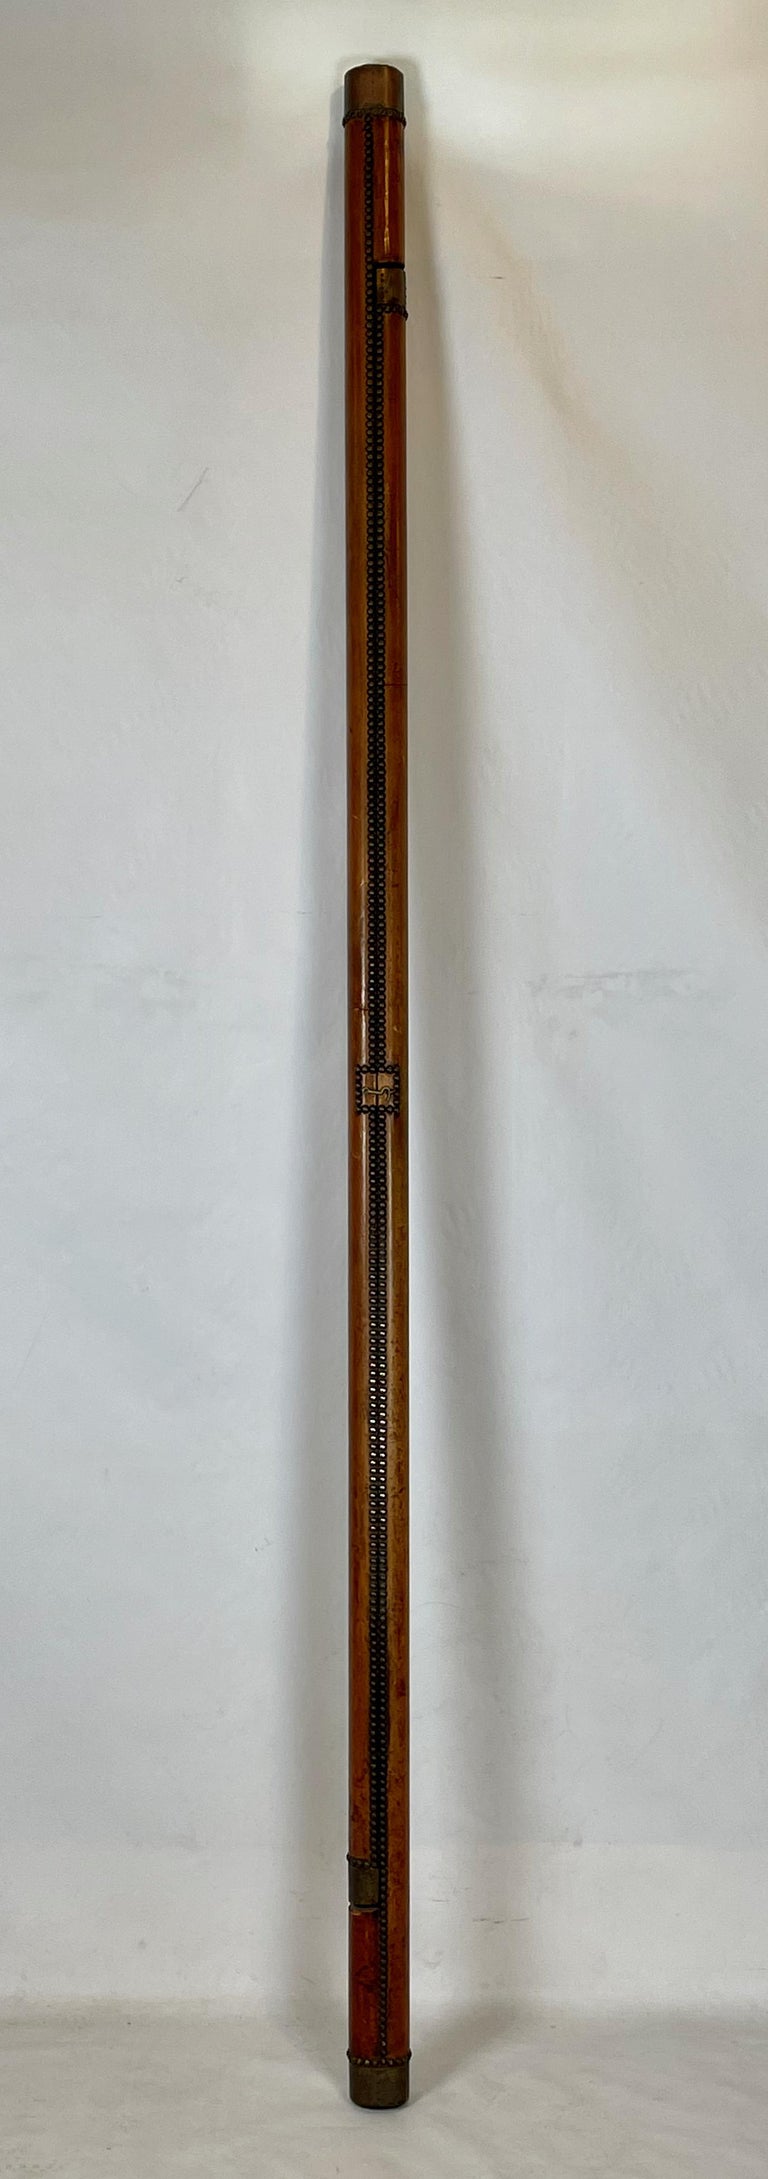 Edwardian Early 20th Century English Leather Clad Folding Pole Ladder For Sale